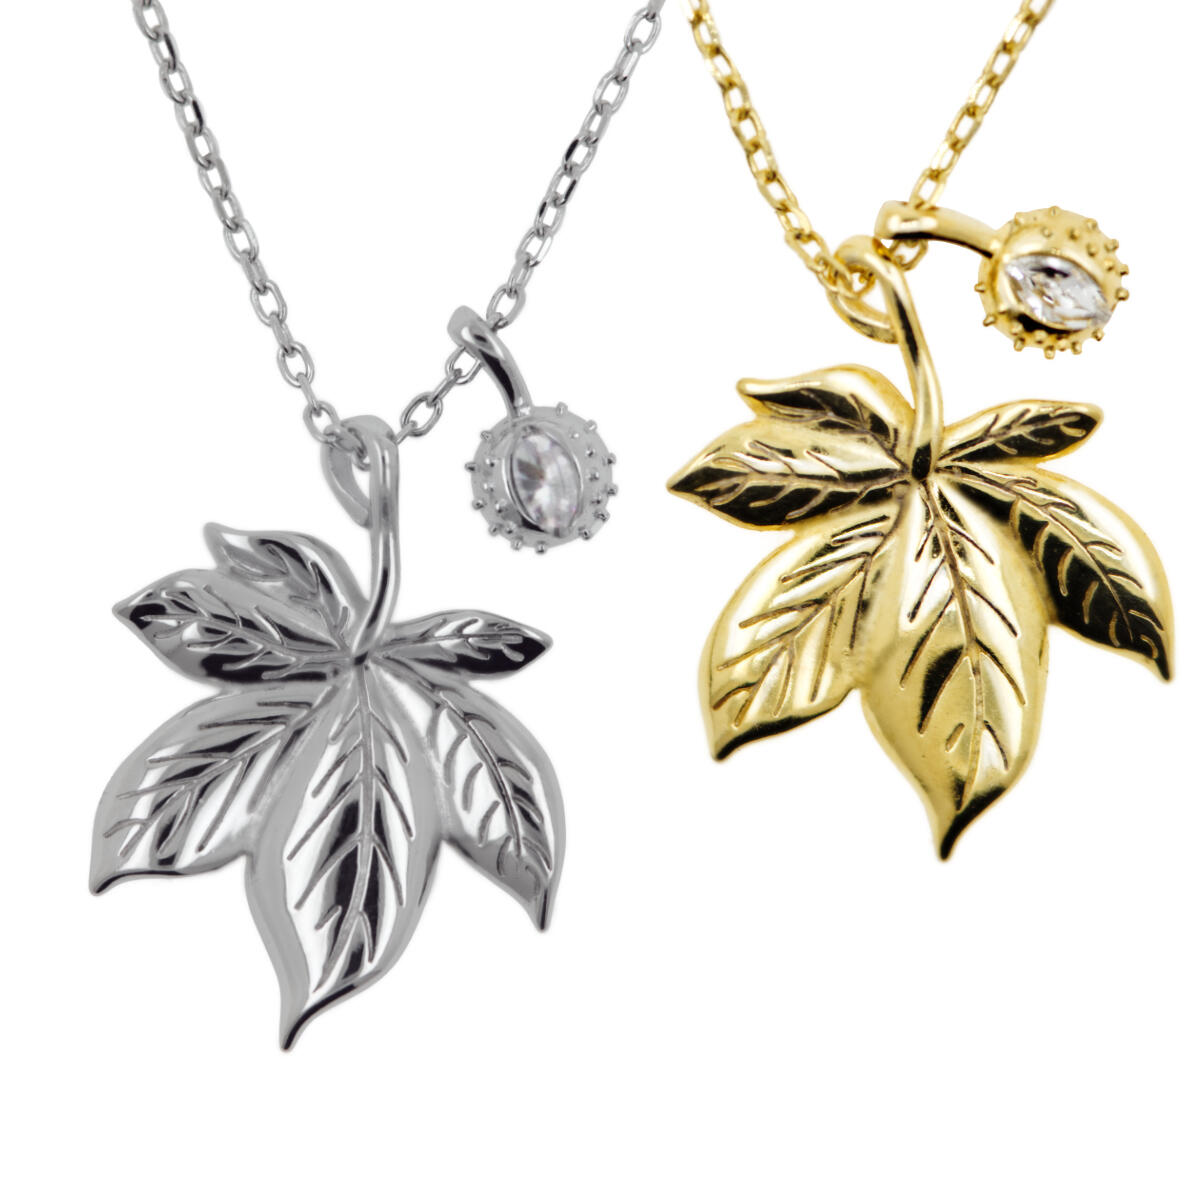  This image presents a prototype lovingly developed by Pantercats—an exceptional necklace inspired by nature, depicting the shape of a leaf from a German chestnut tree. Crafted from fine 925 silver, it showcases the beauty of nature in the form of exquisite jewelry design.